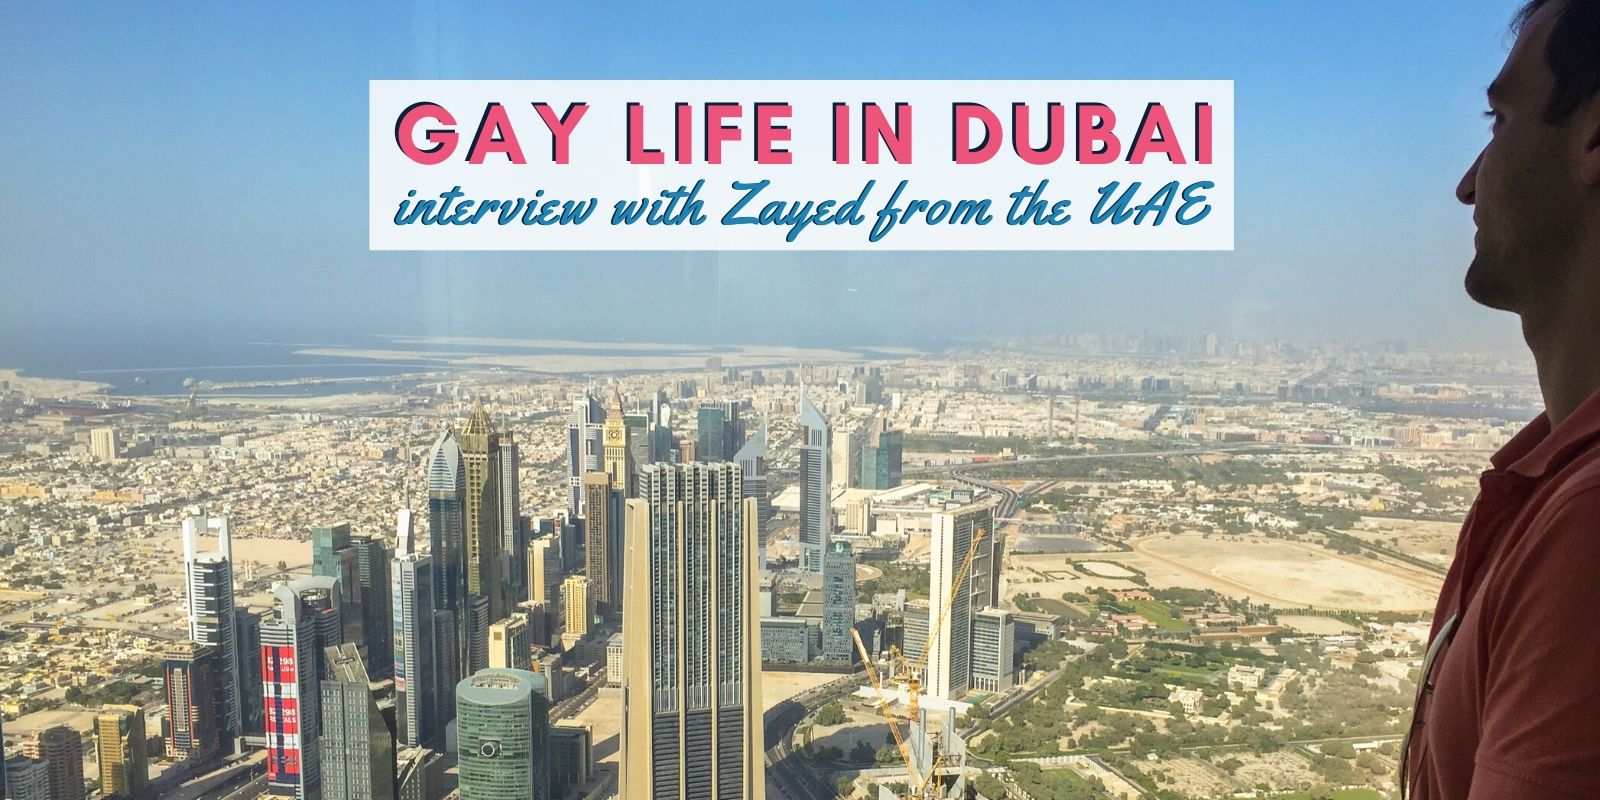 Yes, you can holiday in Dubai if you aren’t married, says our travel expert Doc Holiday